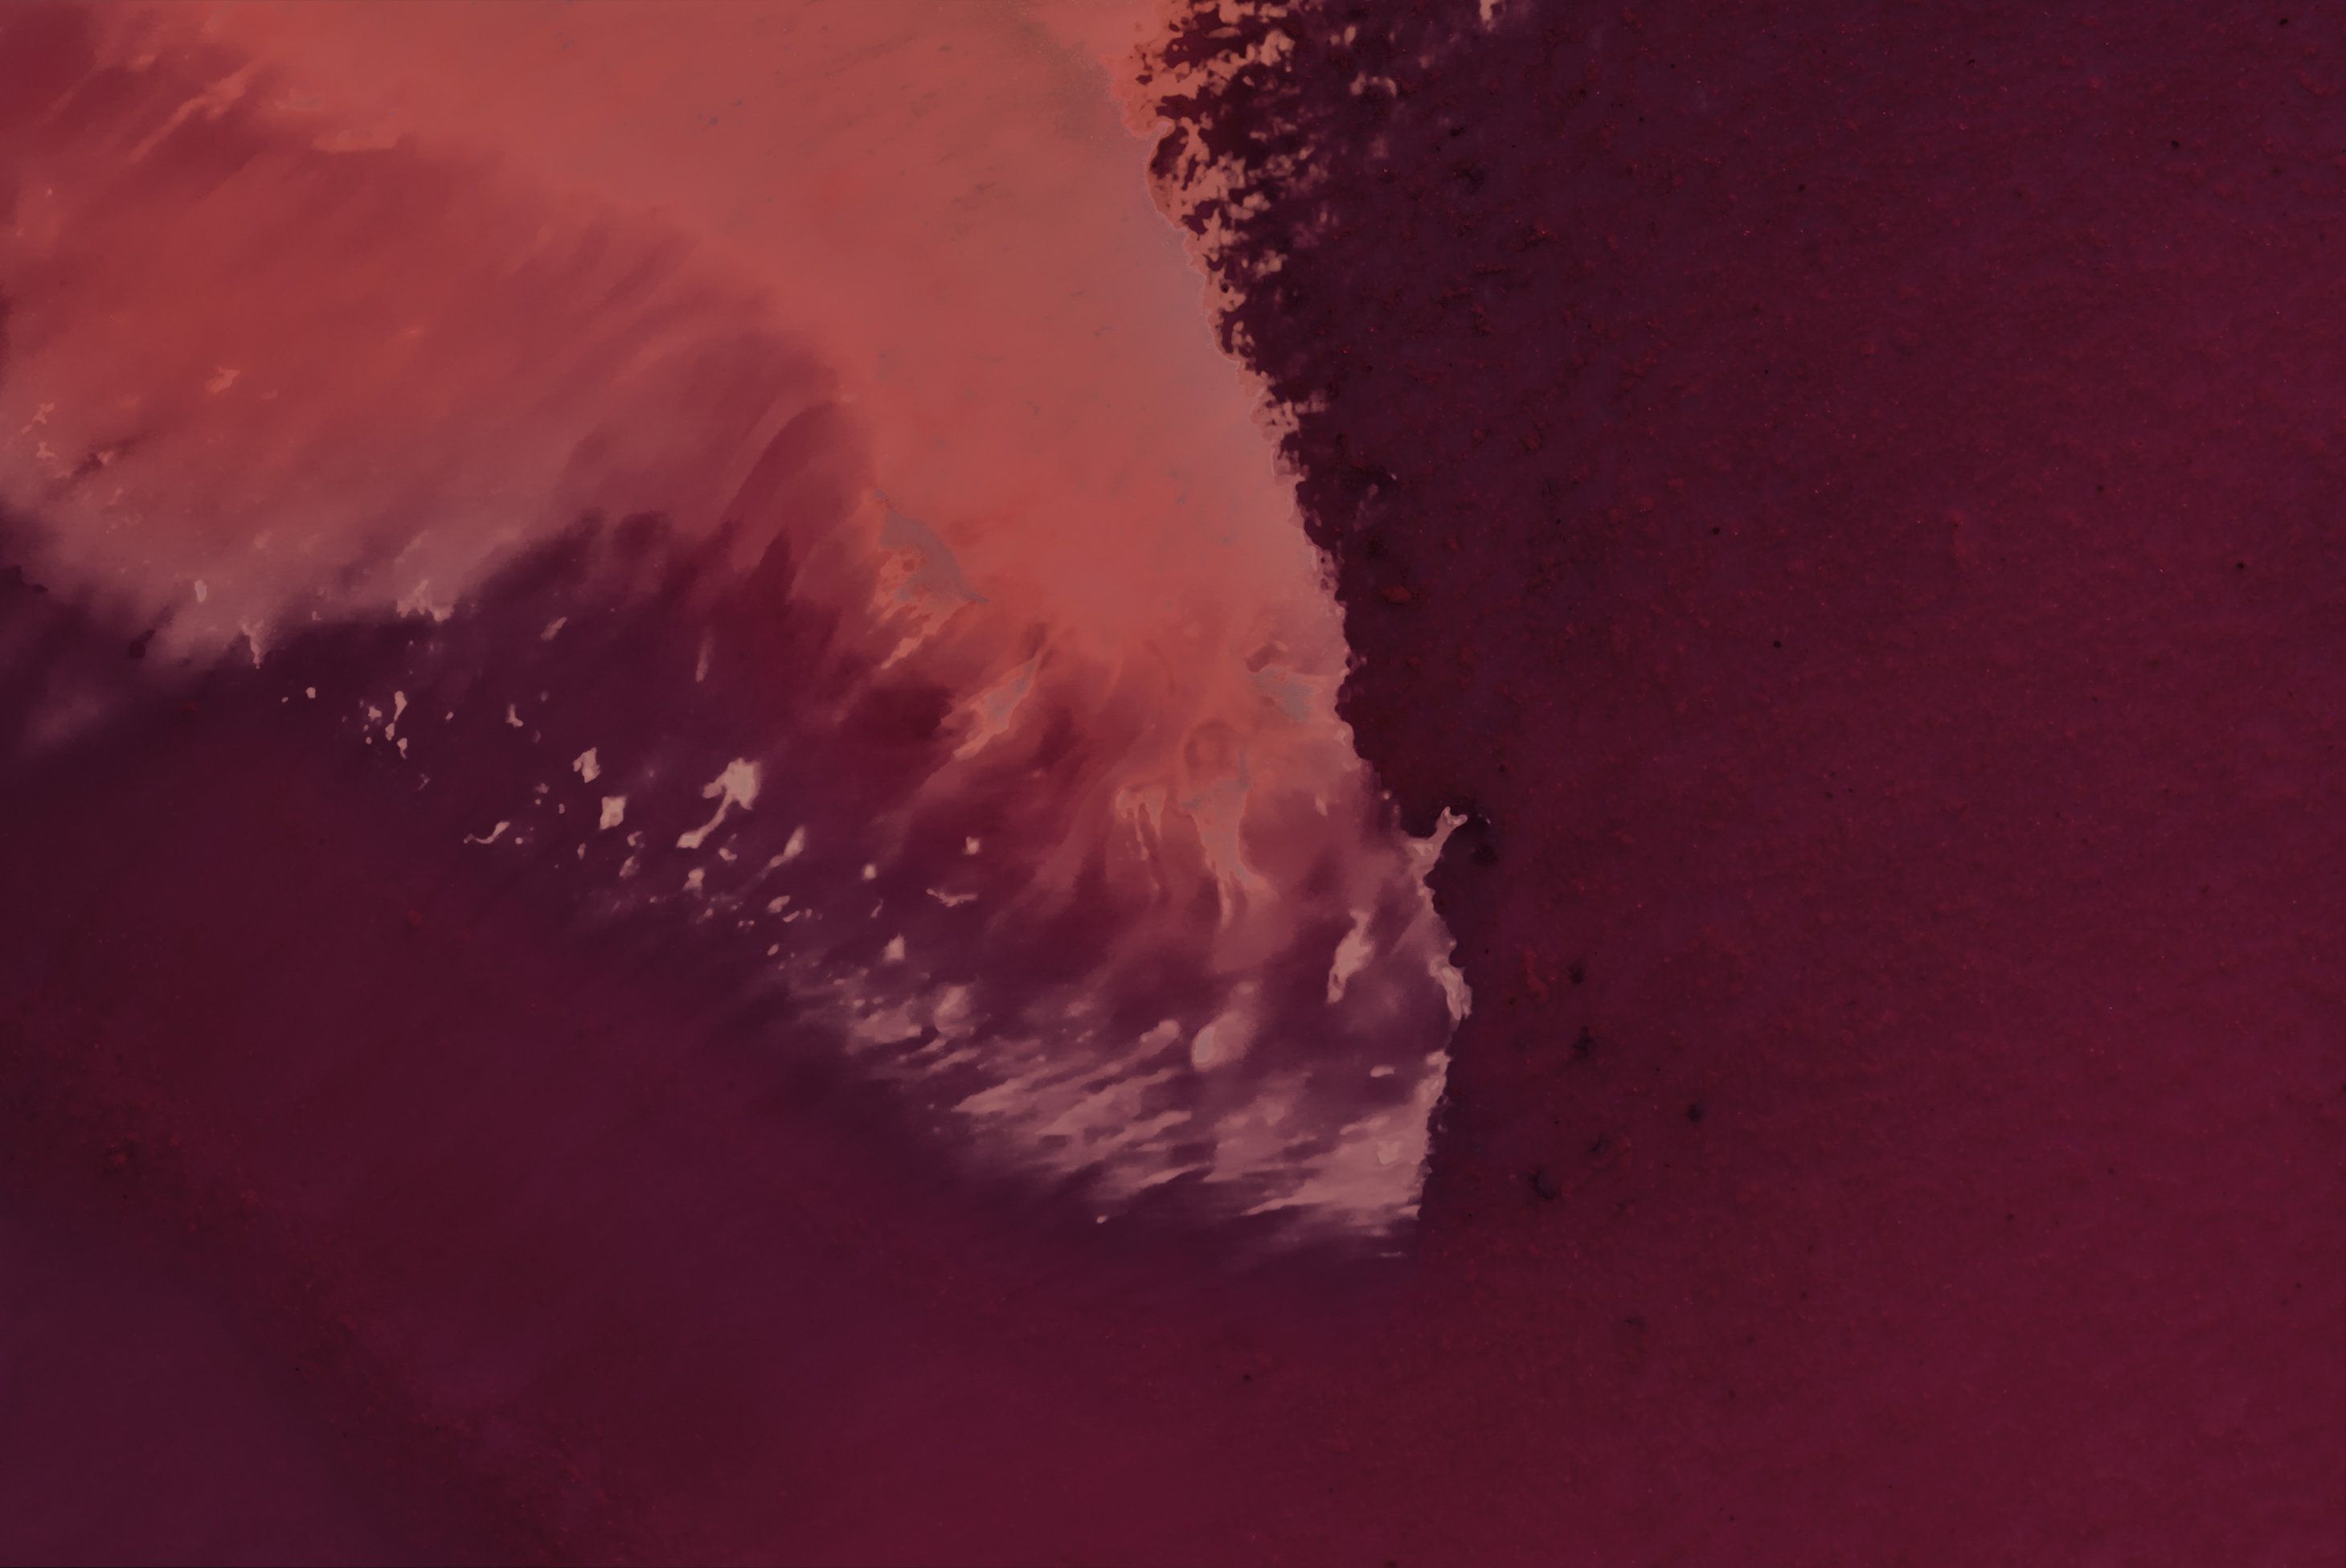 Surface Laptop 2 Burgundy Wallpapers » Surface Tip Forums